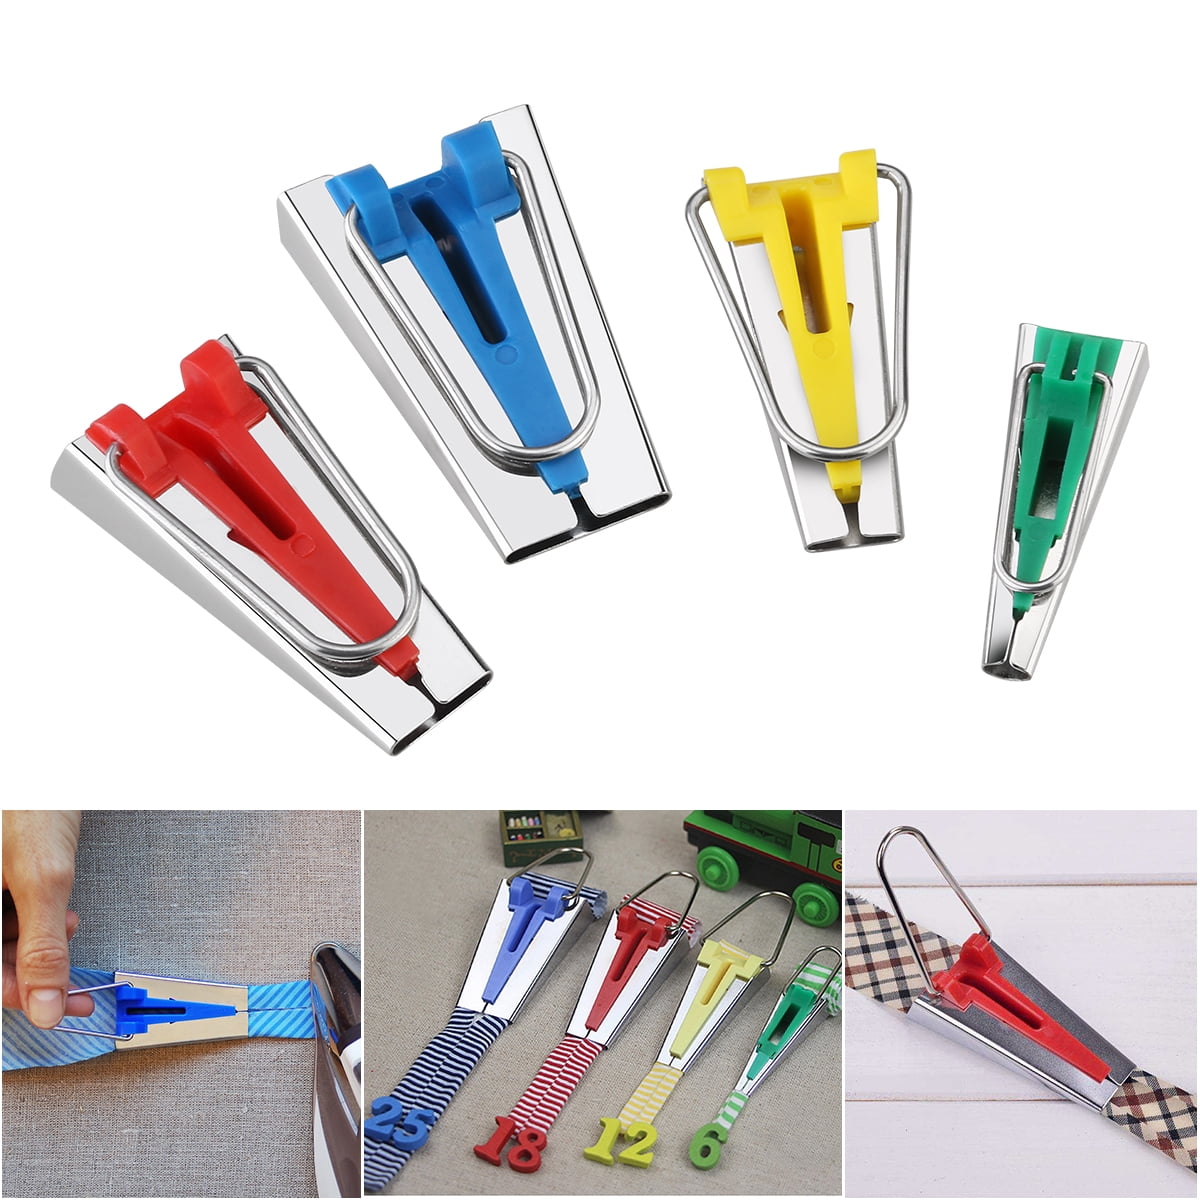 4pcs Fabric Bias Tape Maker 6MM 12MM 18MM 25MM Binding Tools Sewing NEW STYLE 